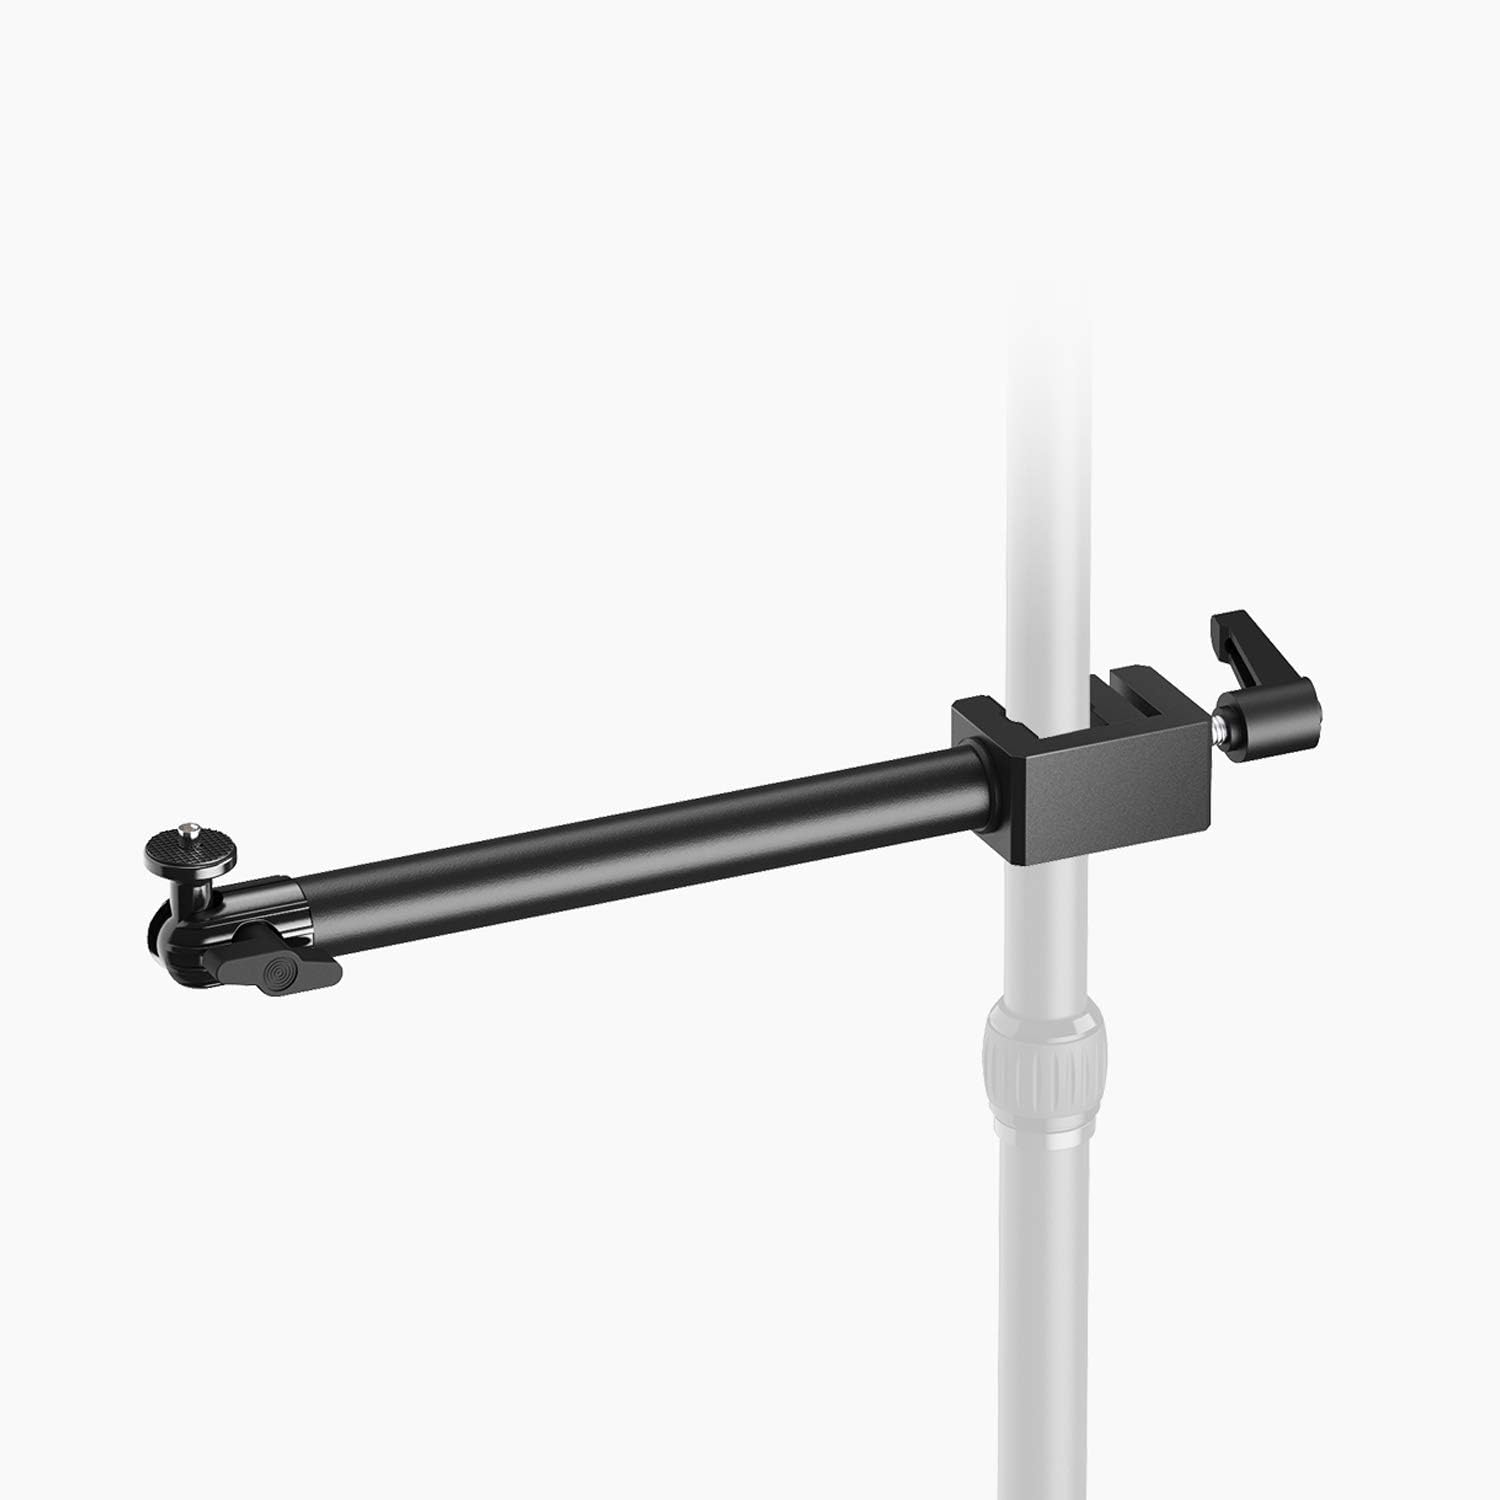 Elgato Solid Arm, Auxiliary Holding arm for Cameras, Lights and More, Multi Mount Accessory (10AAG9901)